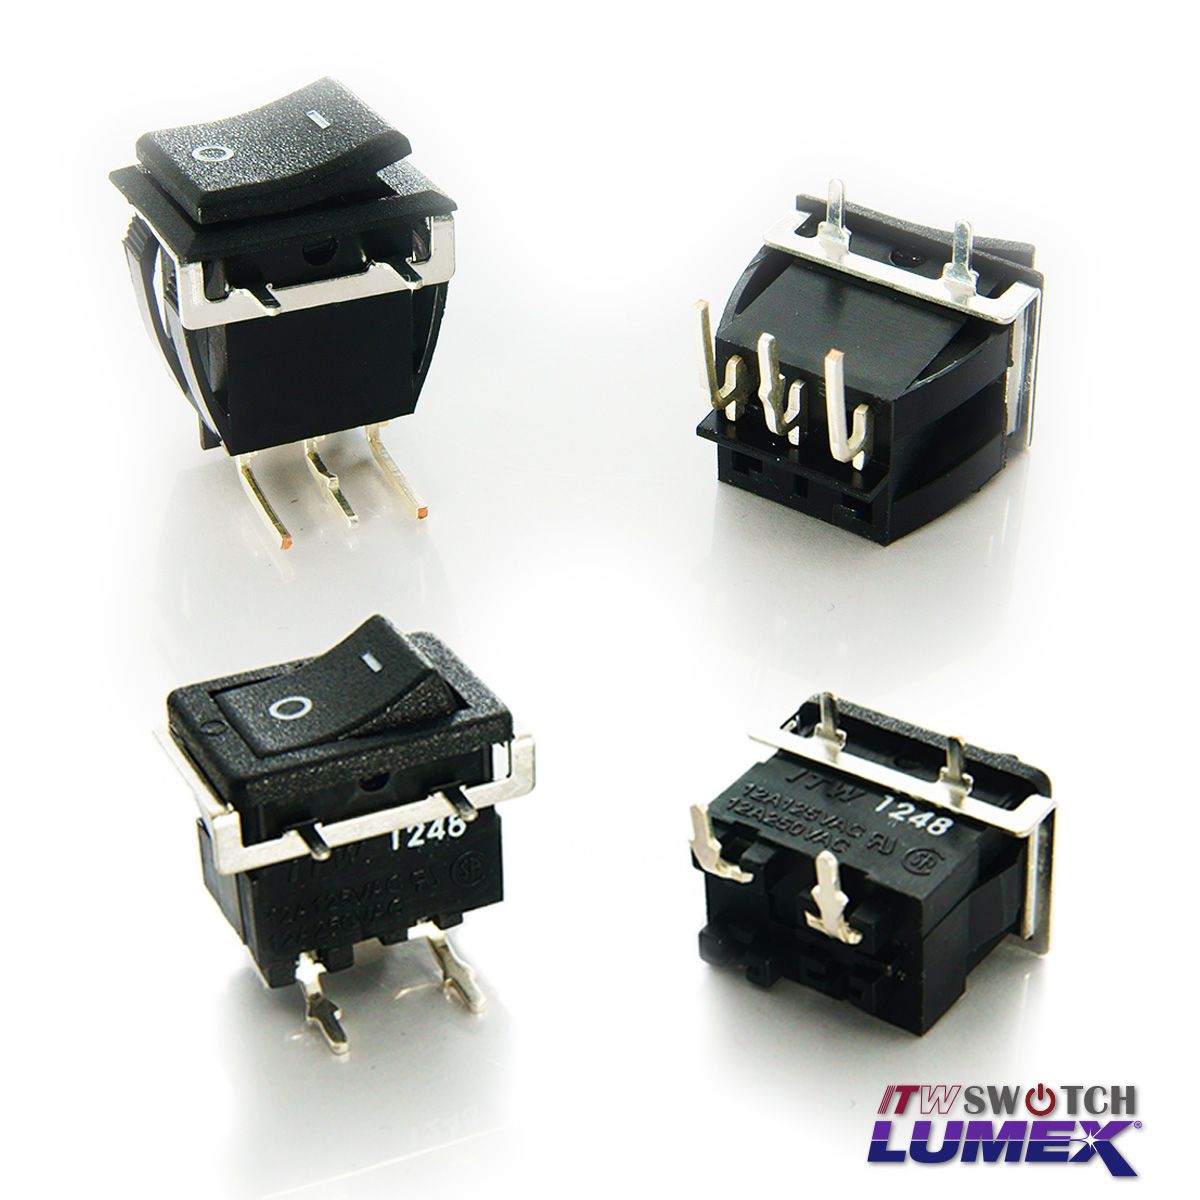 Rocker Switches are available from ITW Lumex Switch.